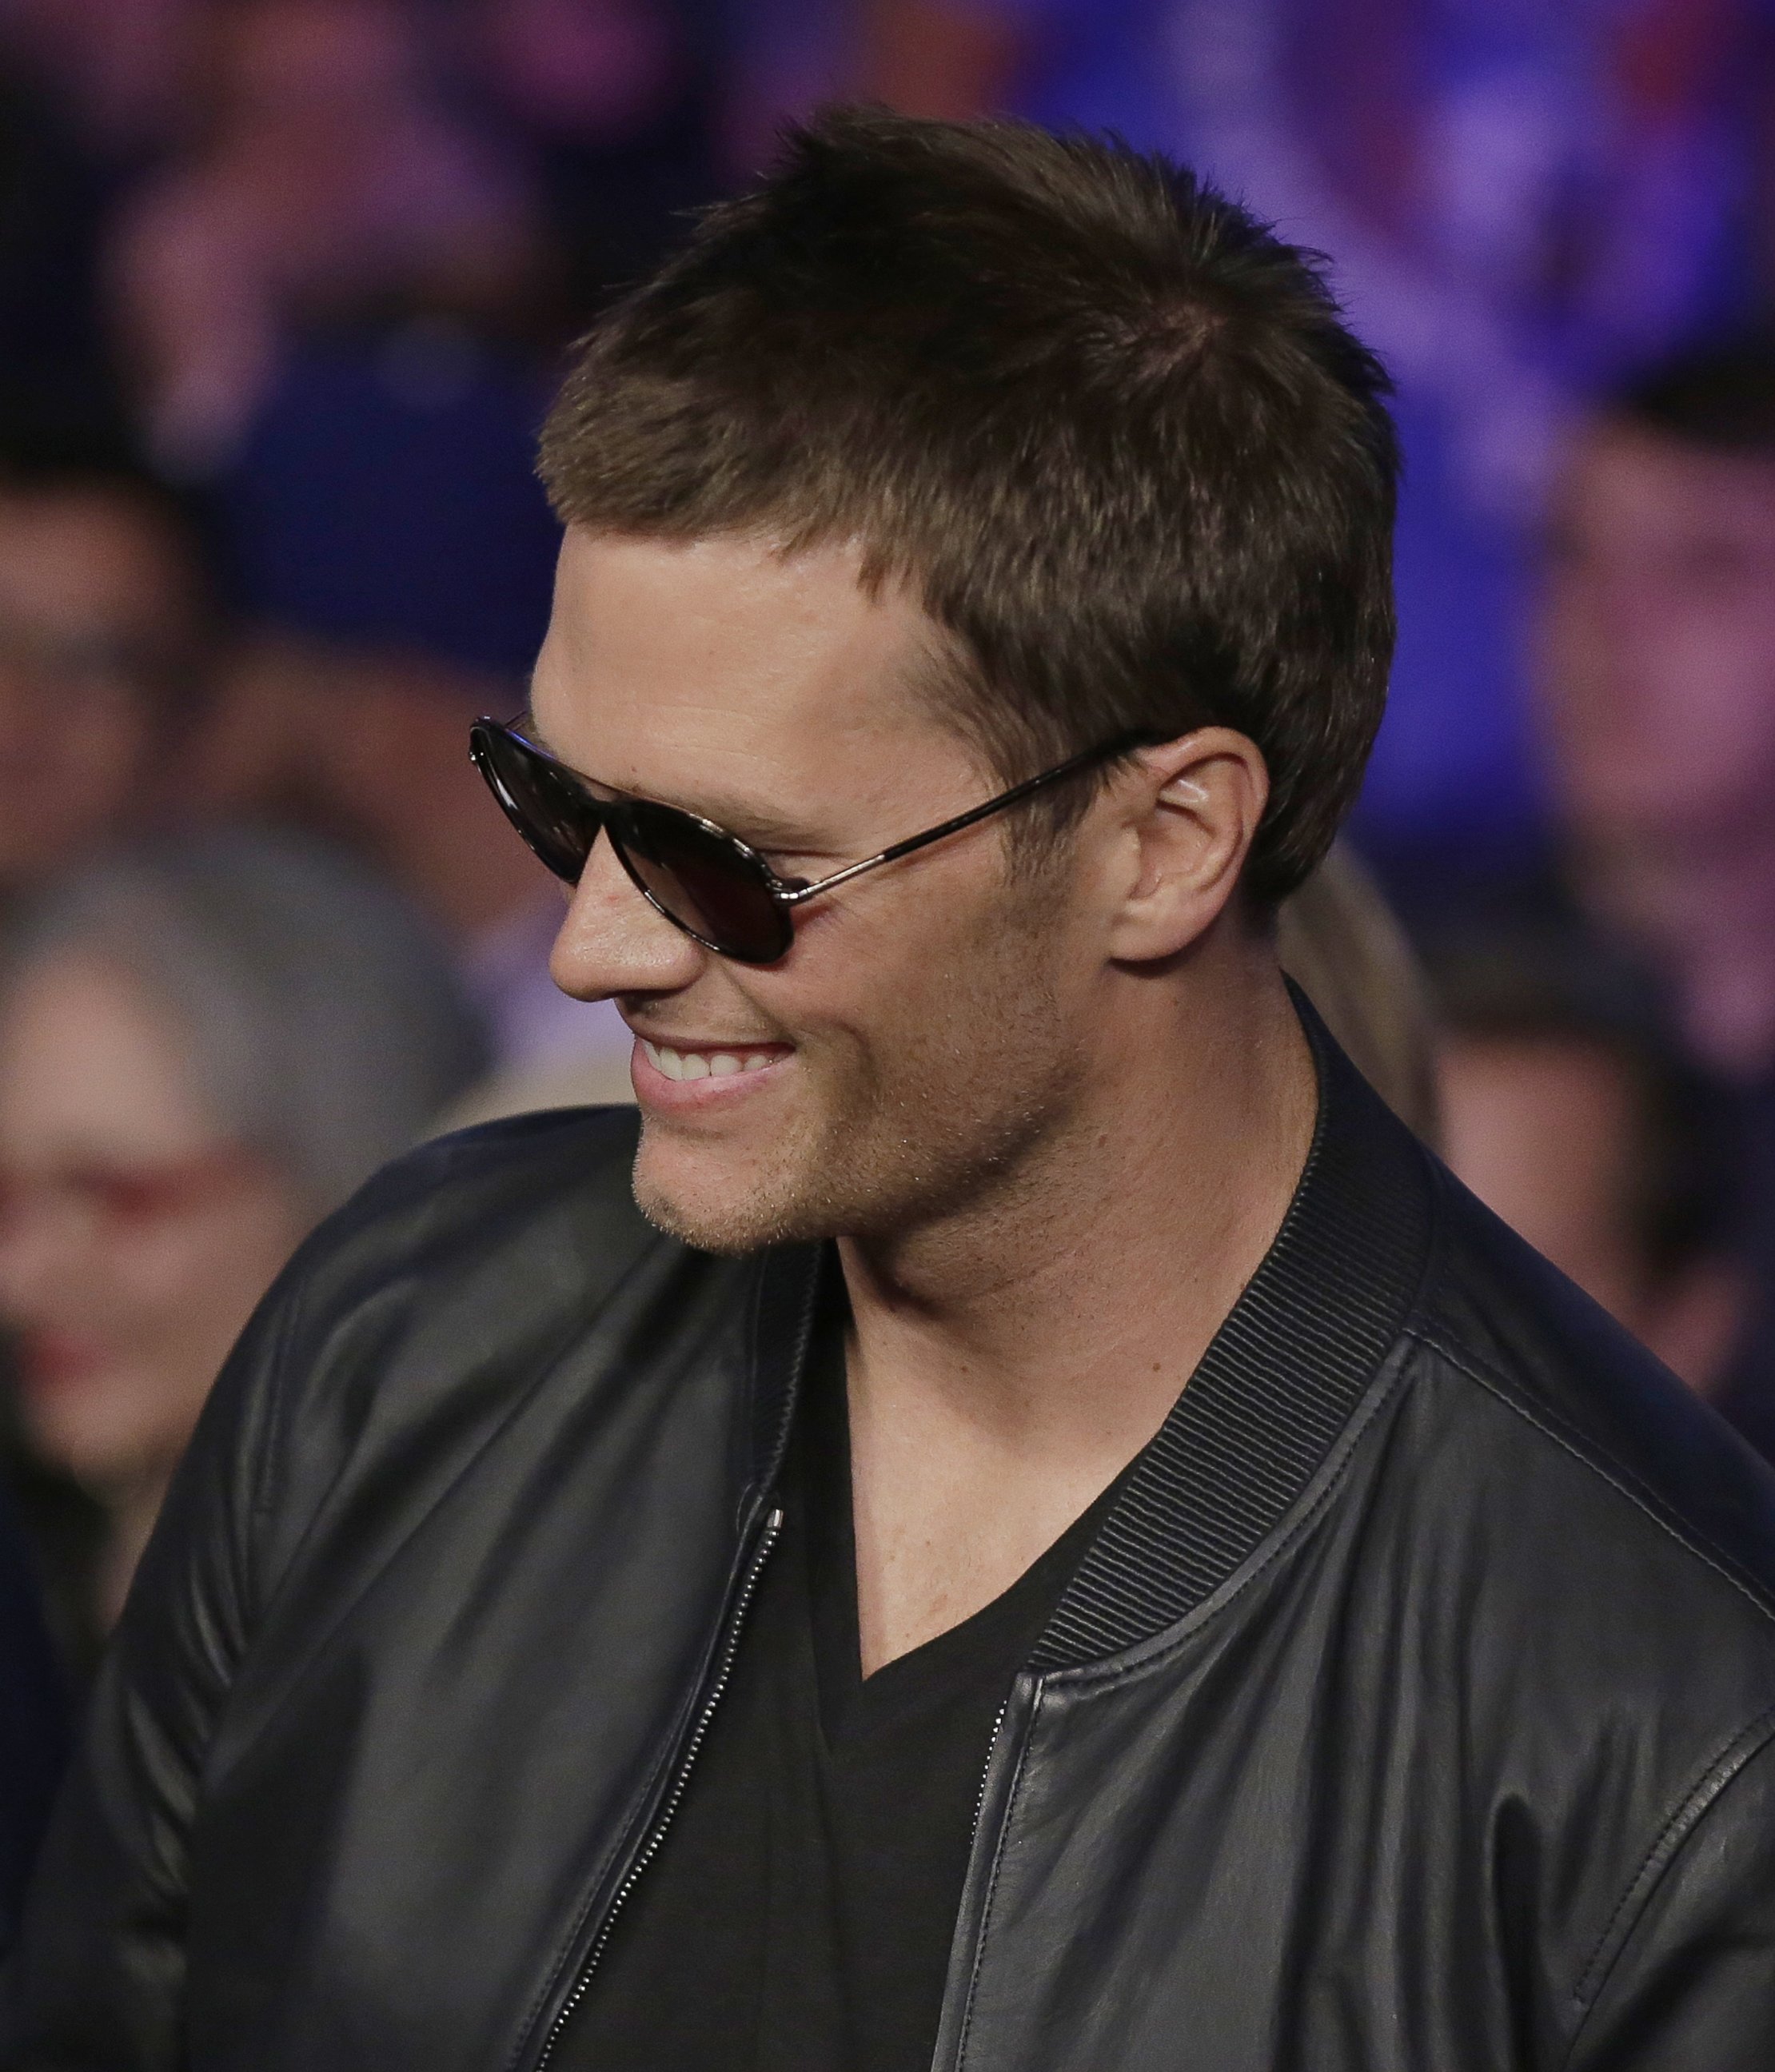 PHOTO: New England Patriots quarterback Tom Brady enters the arena before the start of the world welterweight championship bout between Floyd Mayweather Jr., and Manny Pacquiao, on Saturday, May 2, 2015 in Las Vegas.